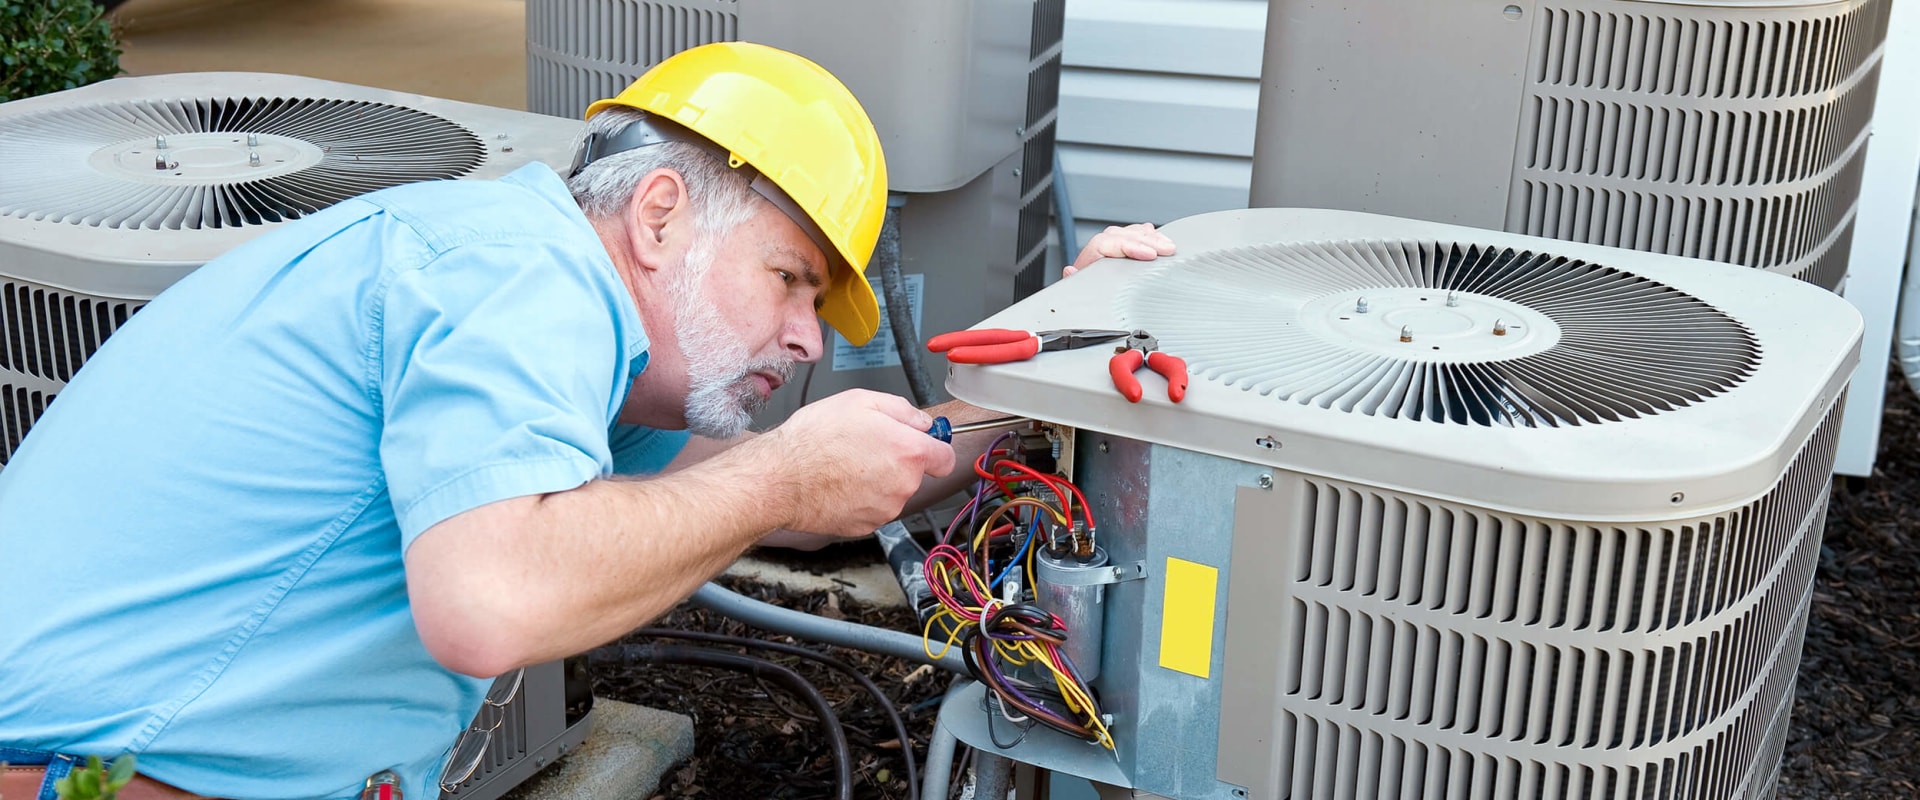 Tips for Finding the Best Professional HVAC Repair Service in Parkland FL